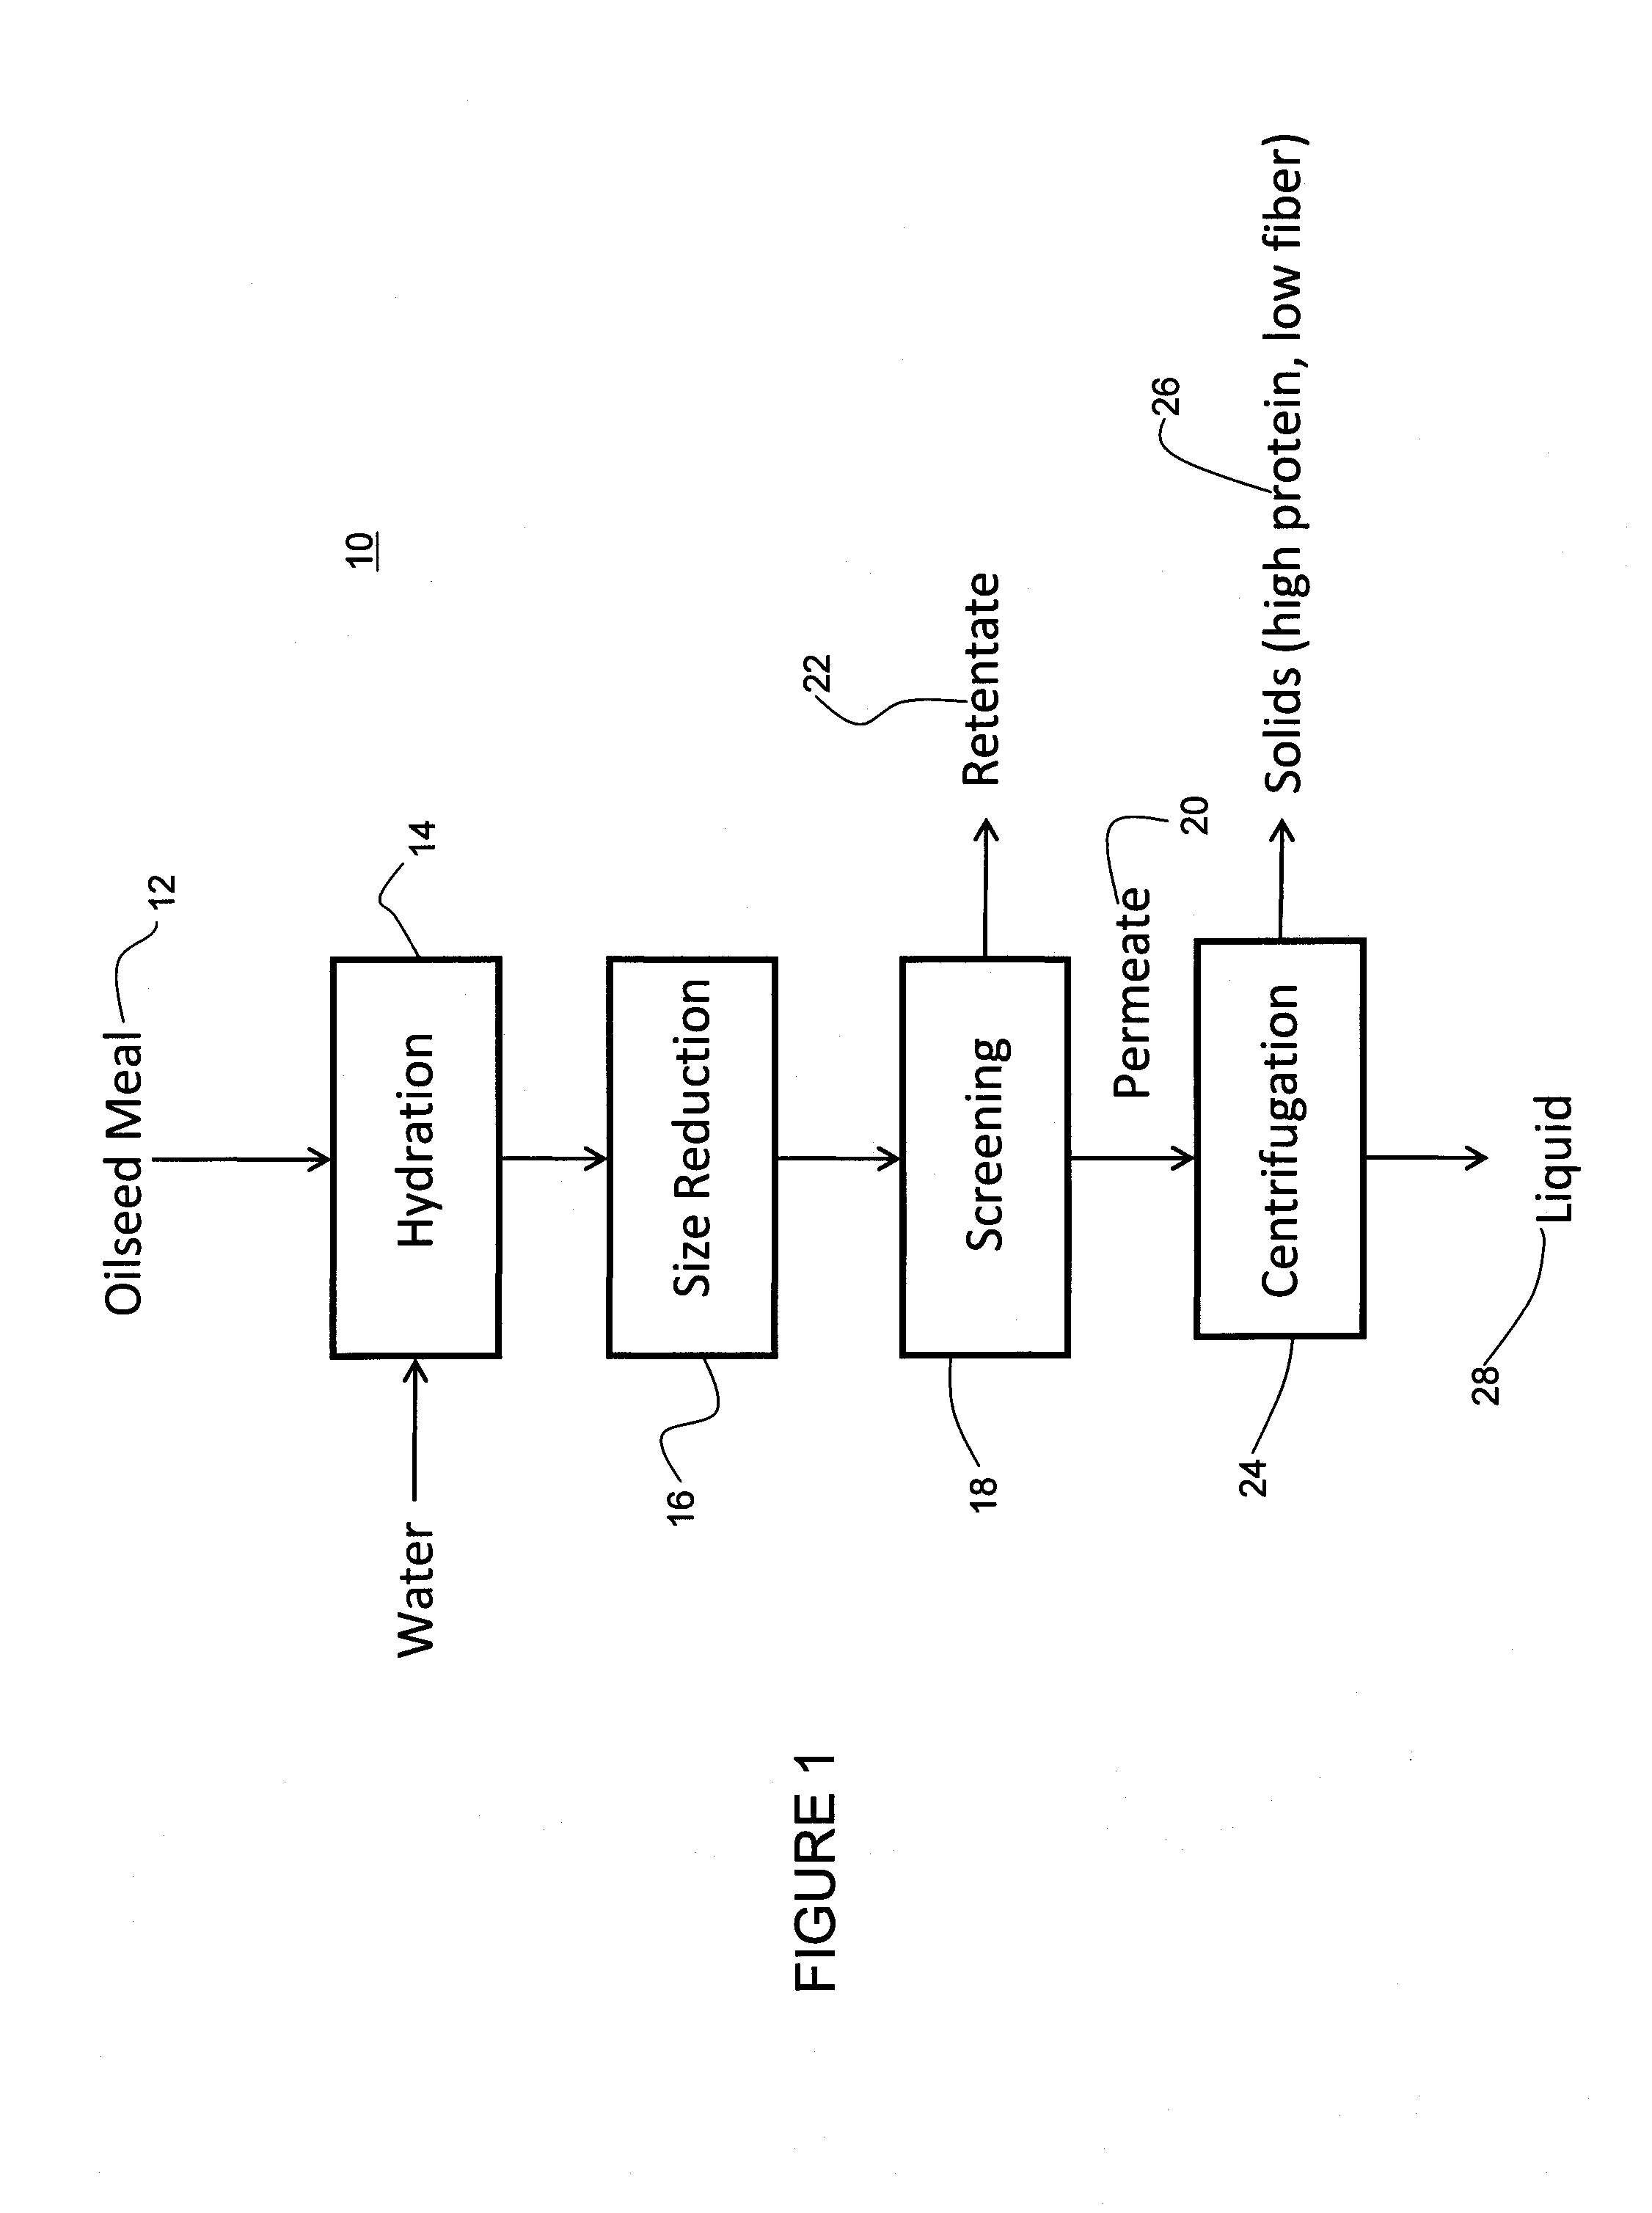 Method and System for Processing Oilseeds